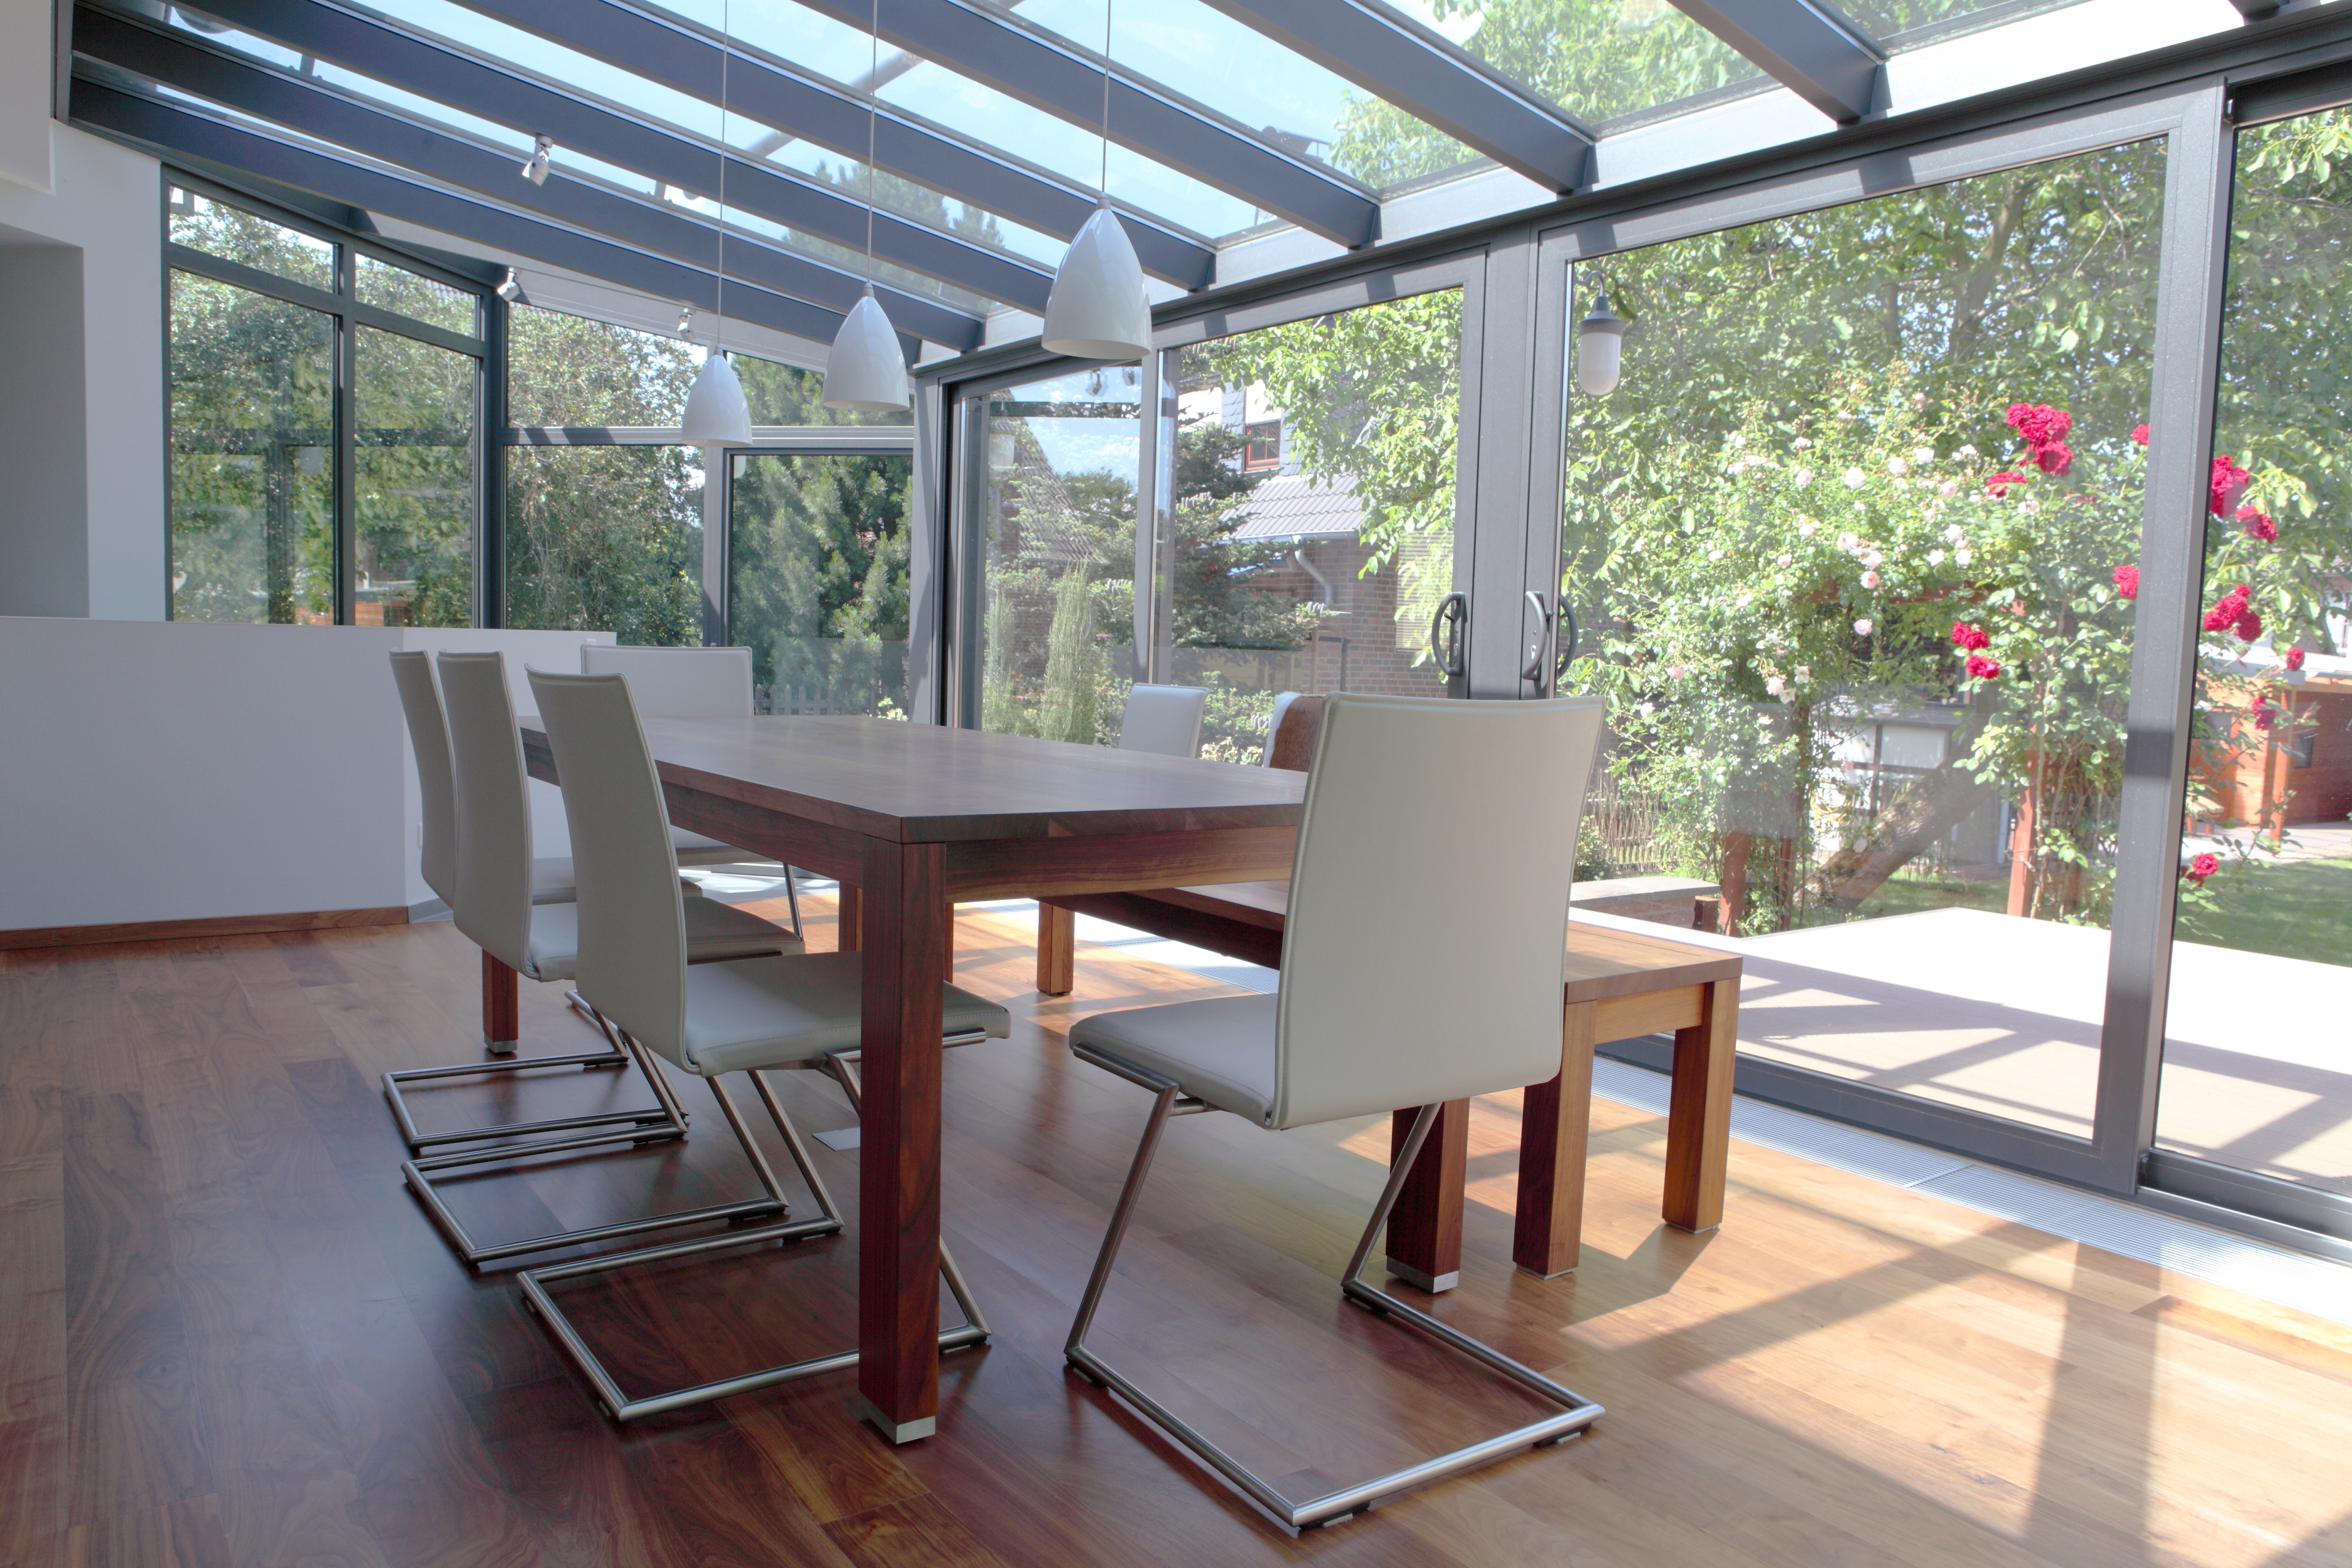 Is wood flooring good for a conservatory?